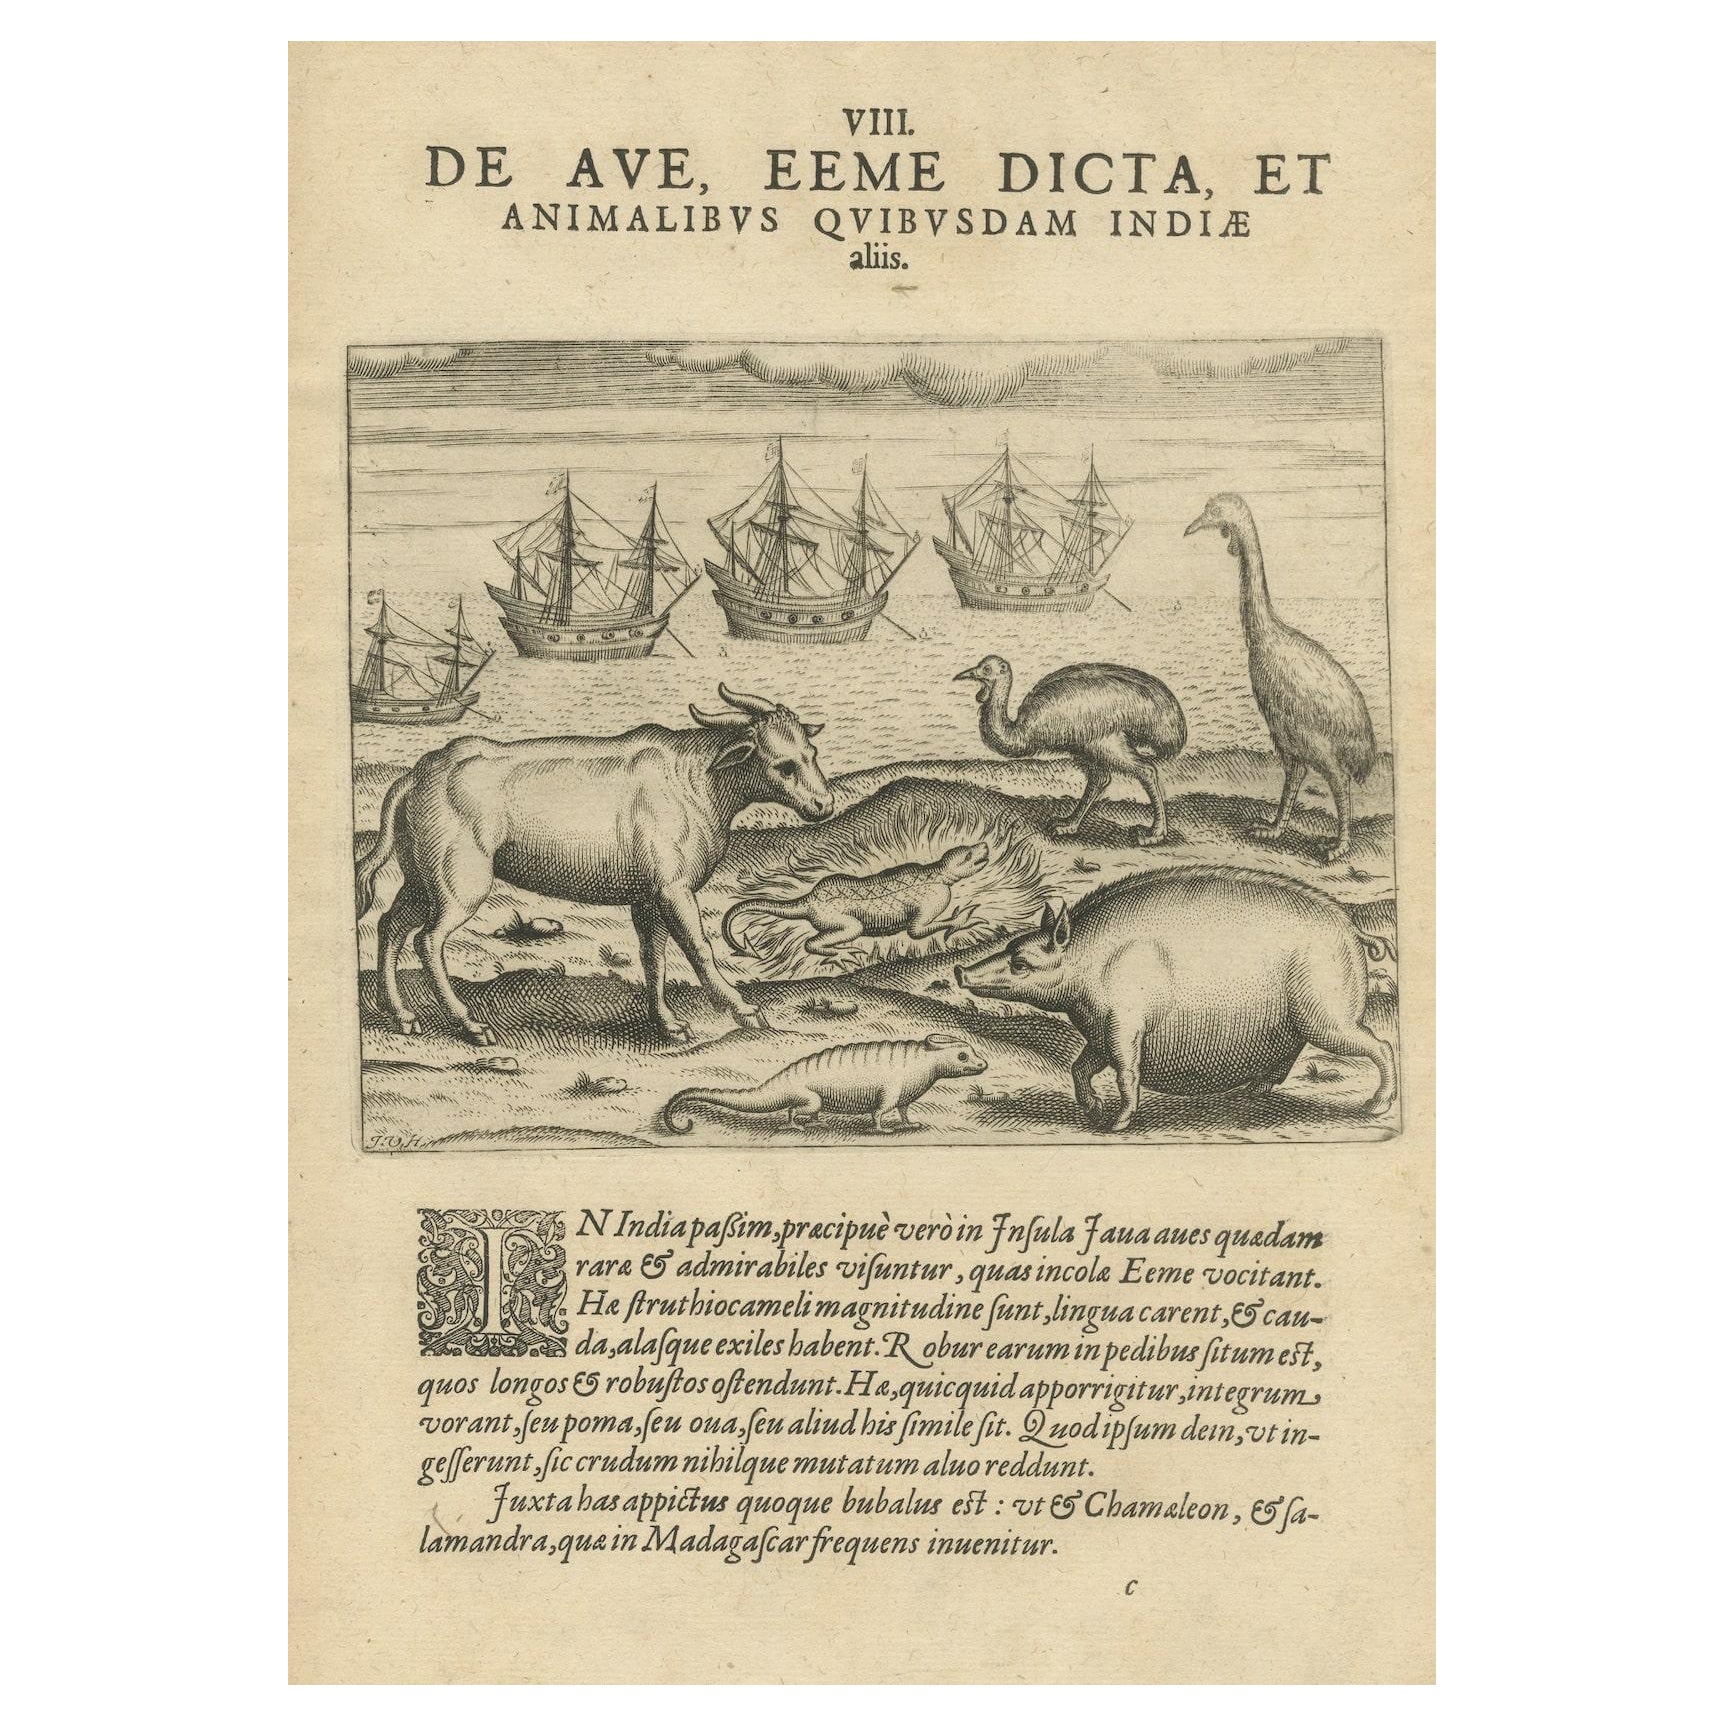 Rare Creatures of the East: A 1601 de Bry Copper Engraving from the Indies For Sale